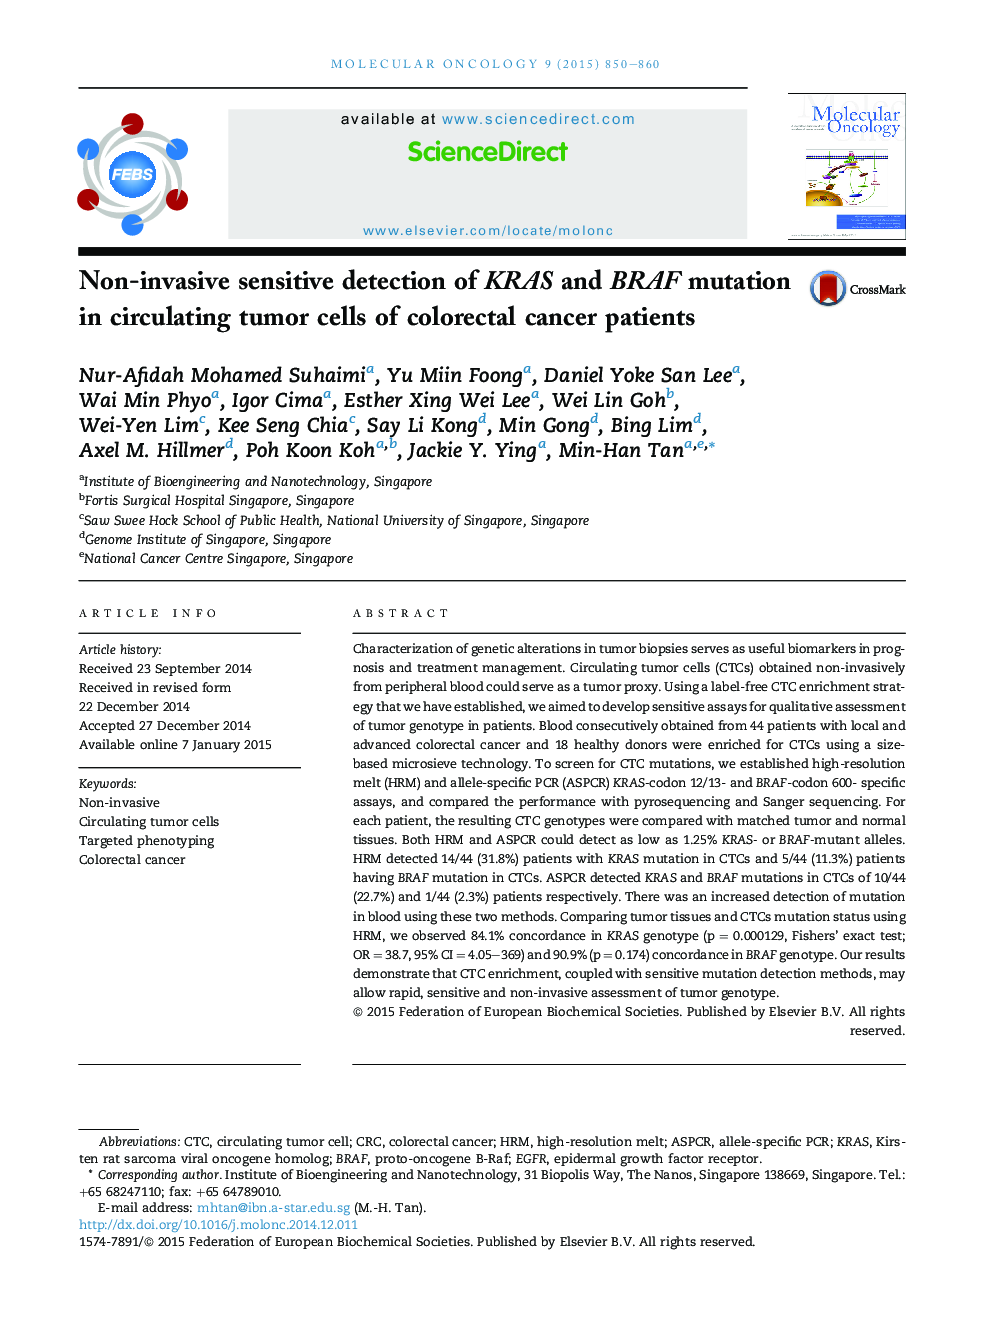 Non-invasive sensitive detection of KRAS and BRAF mutation in circulating tumor cells of colorectal cancer patients